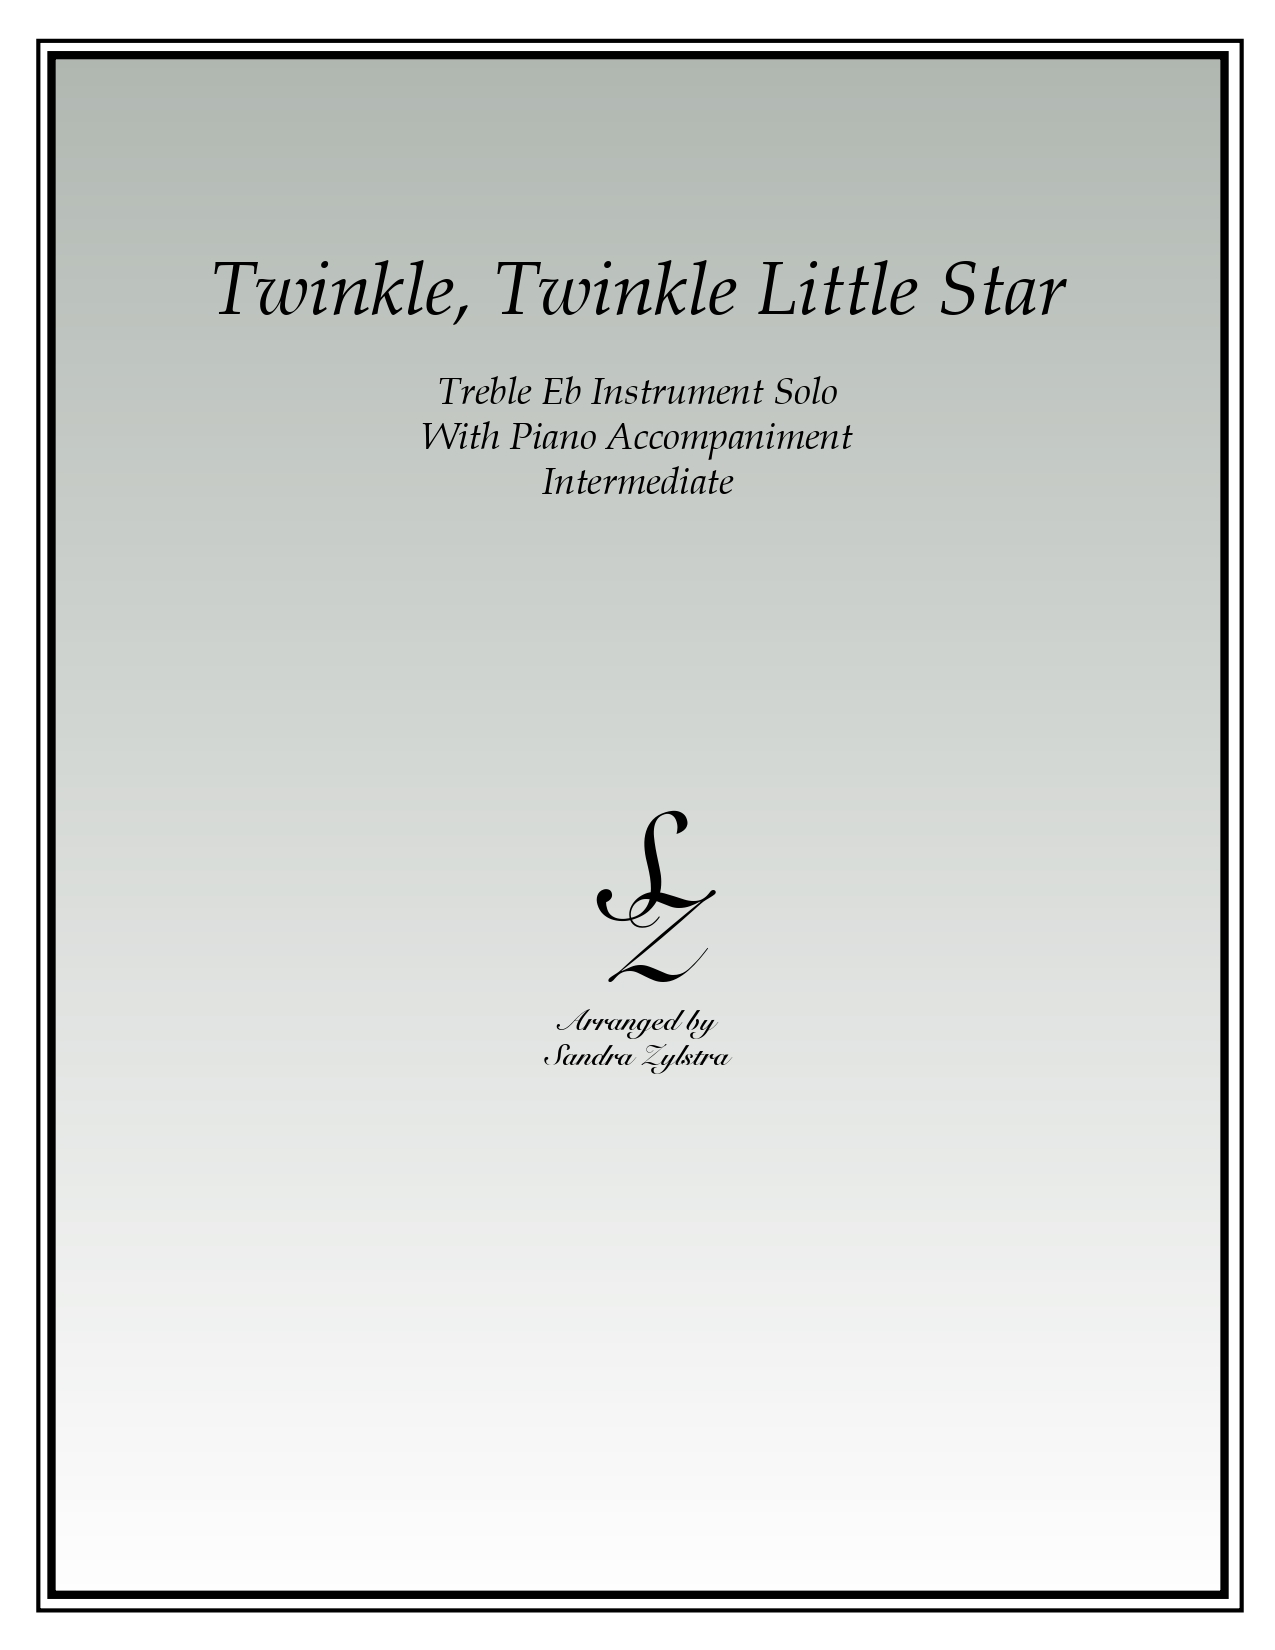 Twinkle Twinkle Little Star Eb instrument solo part cover page 00011